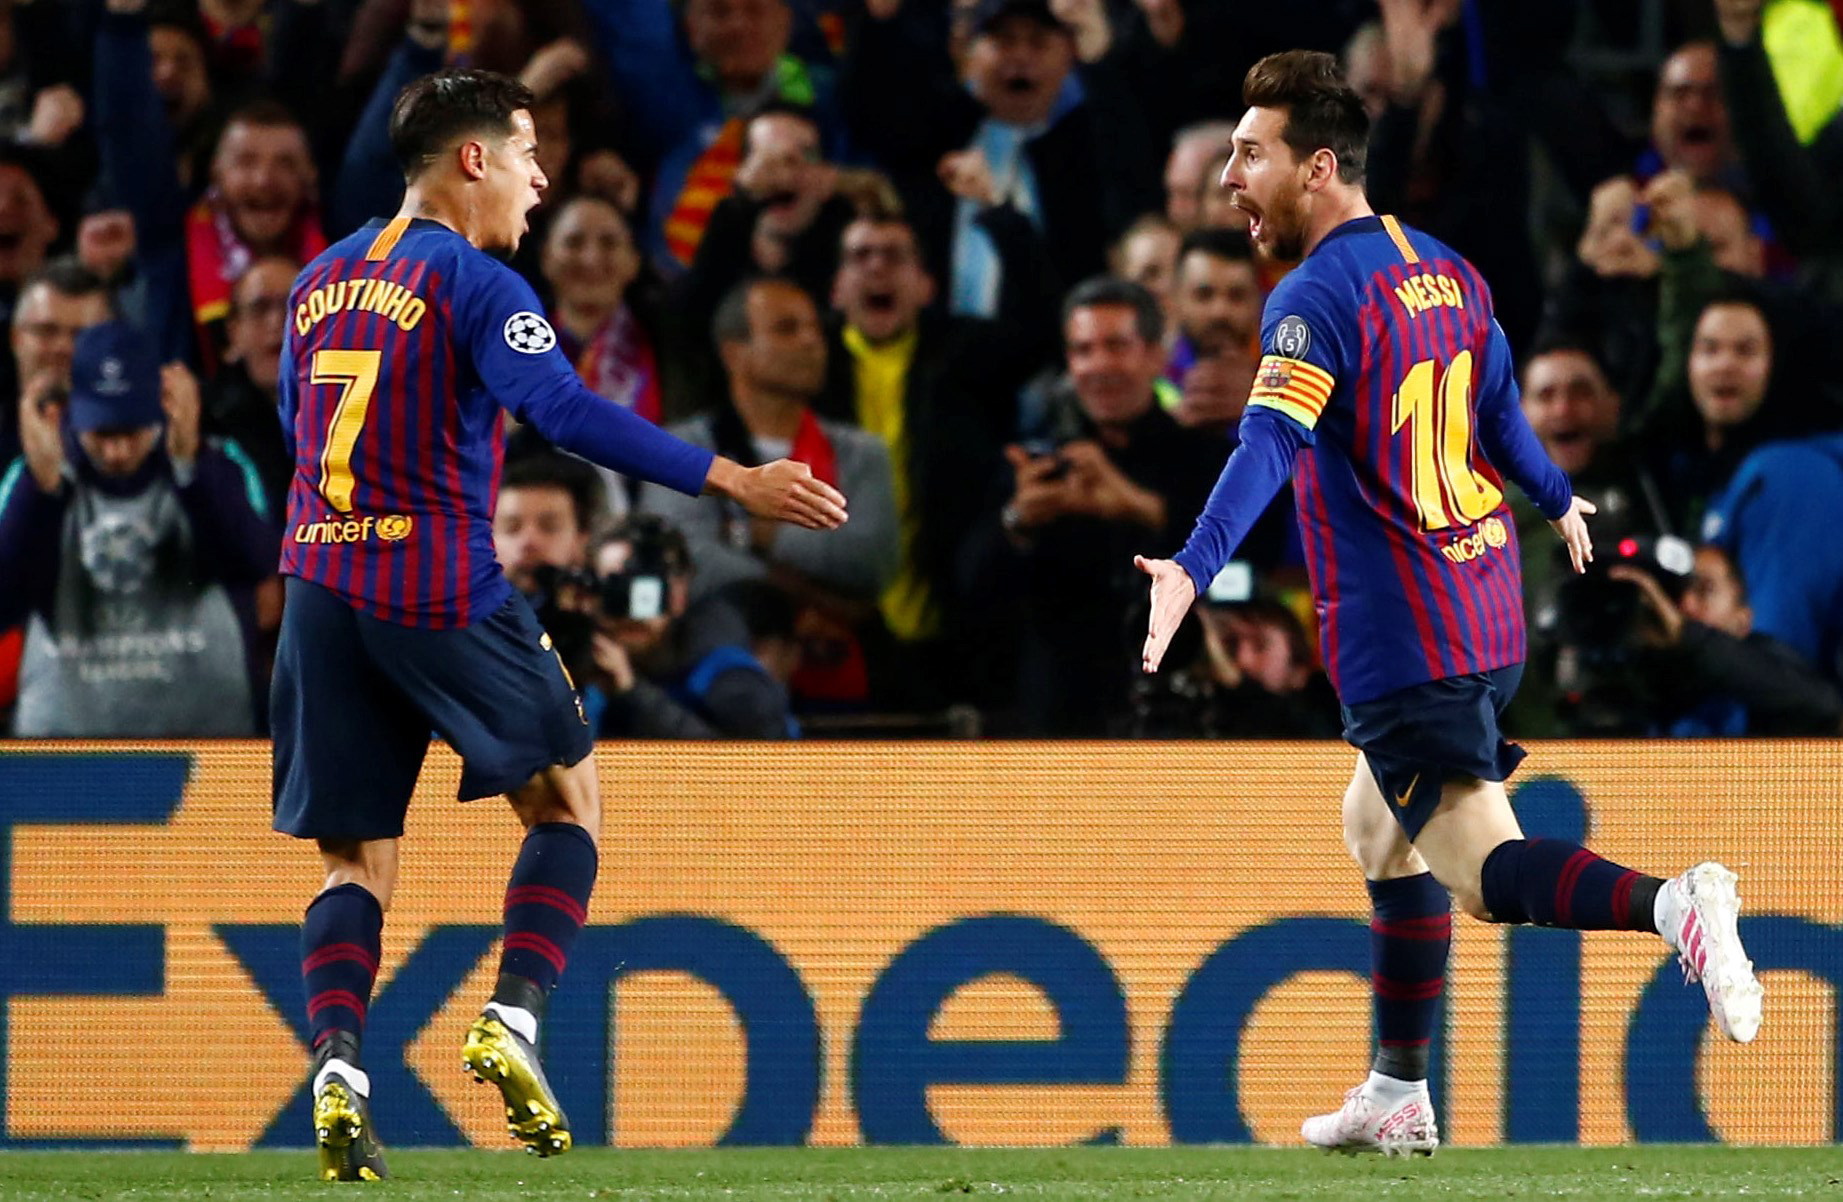 epa07510799 FC Barcelona's forward Leo Messi (R) celebrates with his teammate Philippe Coutinho (L) after scoring the 1-0 during the UEFA Champions League quarter-final second leg match between FC Barcelona and Manchester United at Camp Nou stadium in Barcelona, Catalonia, Spain, 16 April 2019.  EPA/Enric Fontcuberta